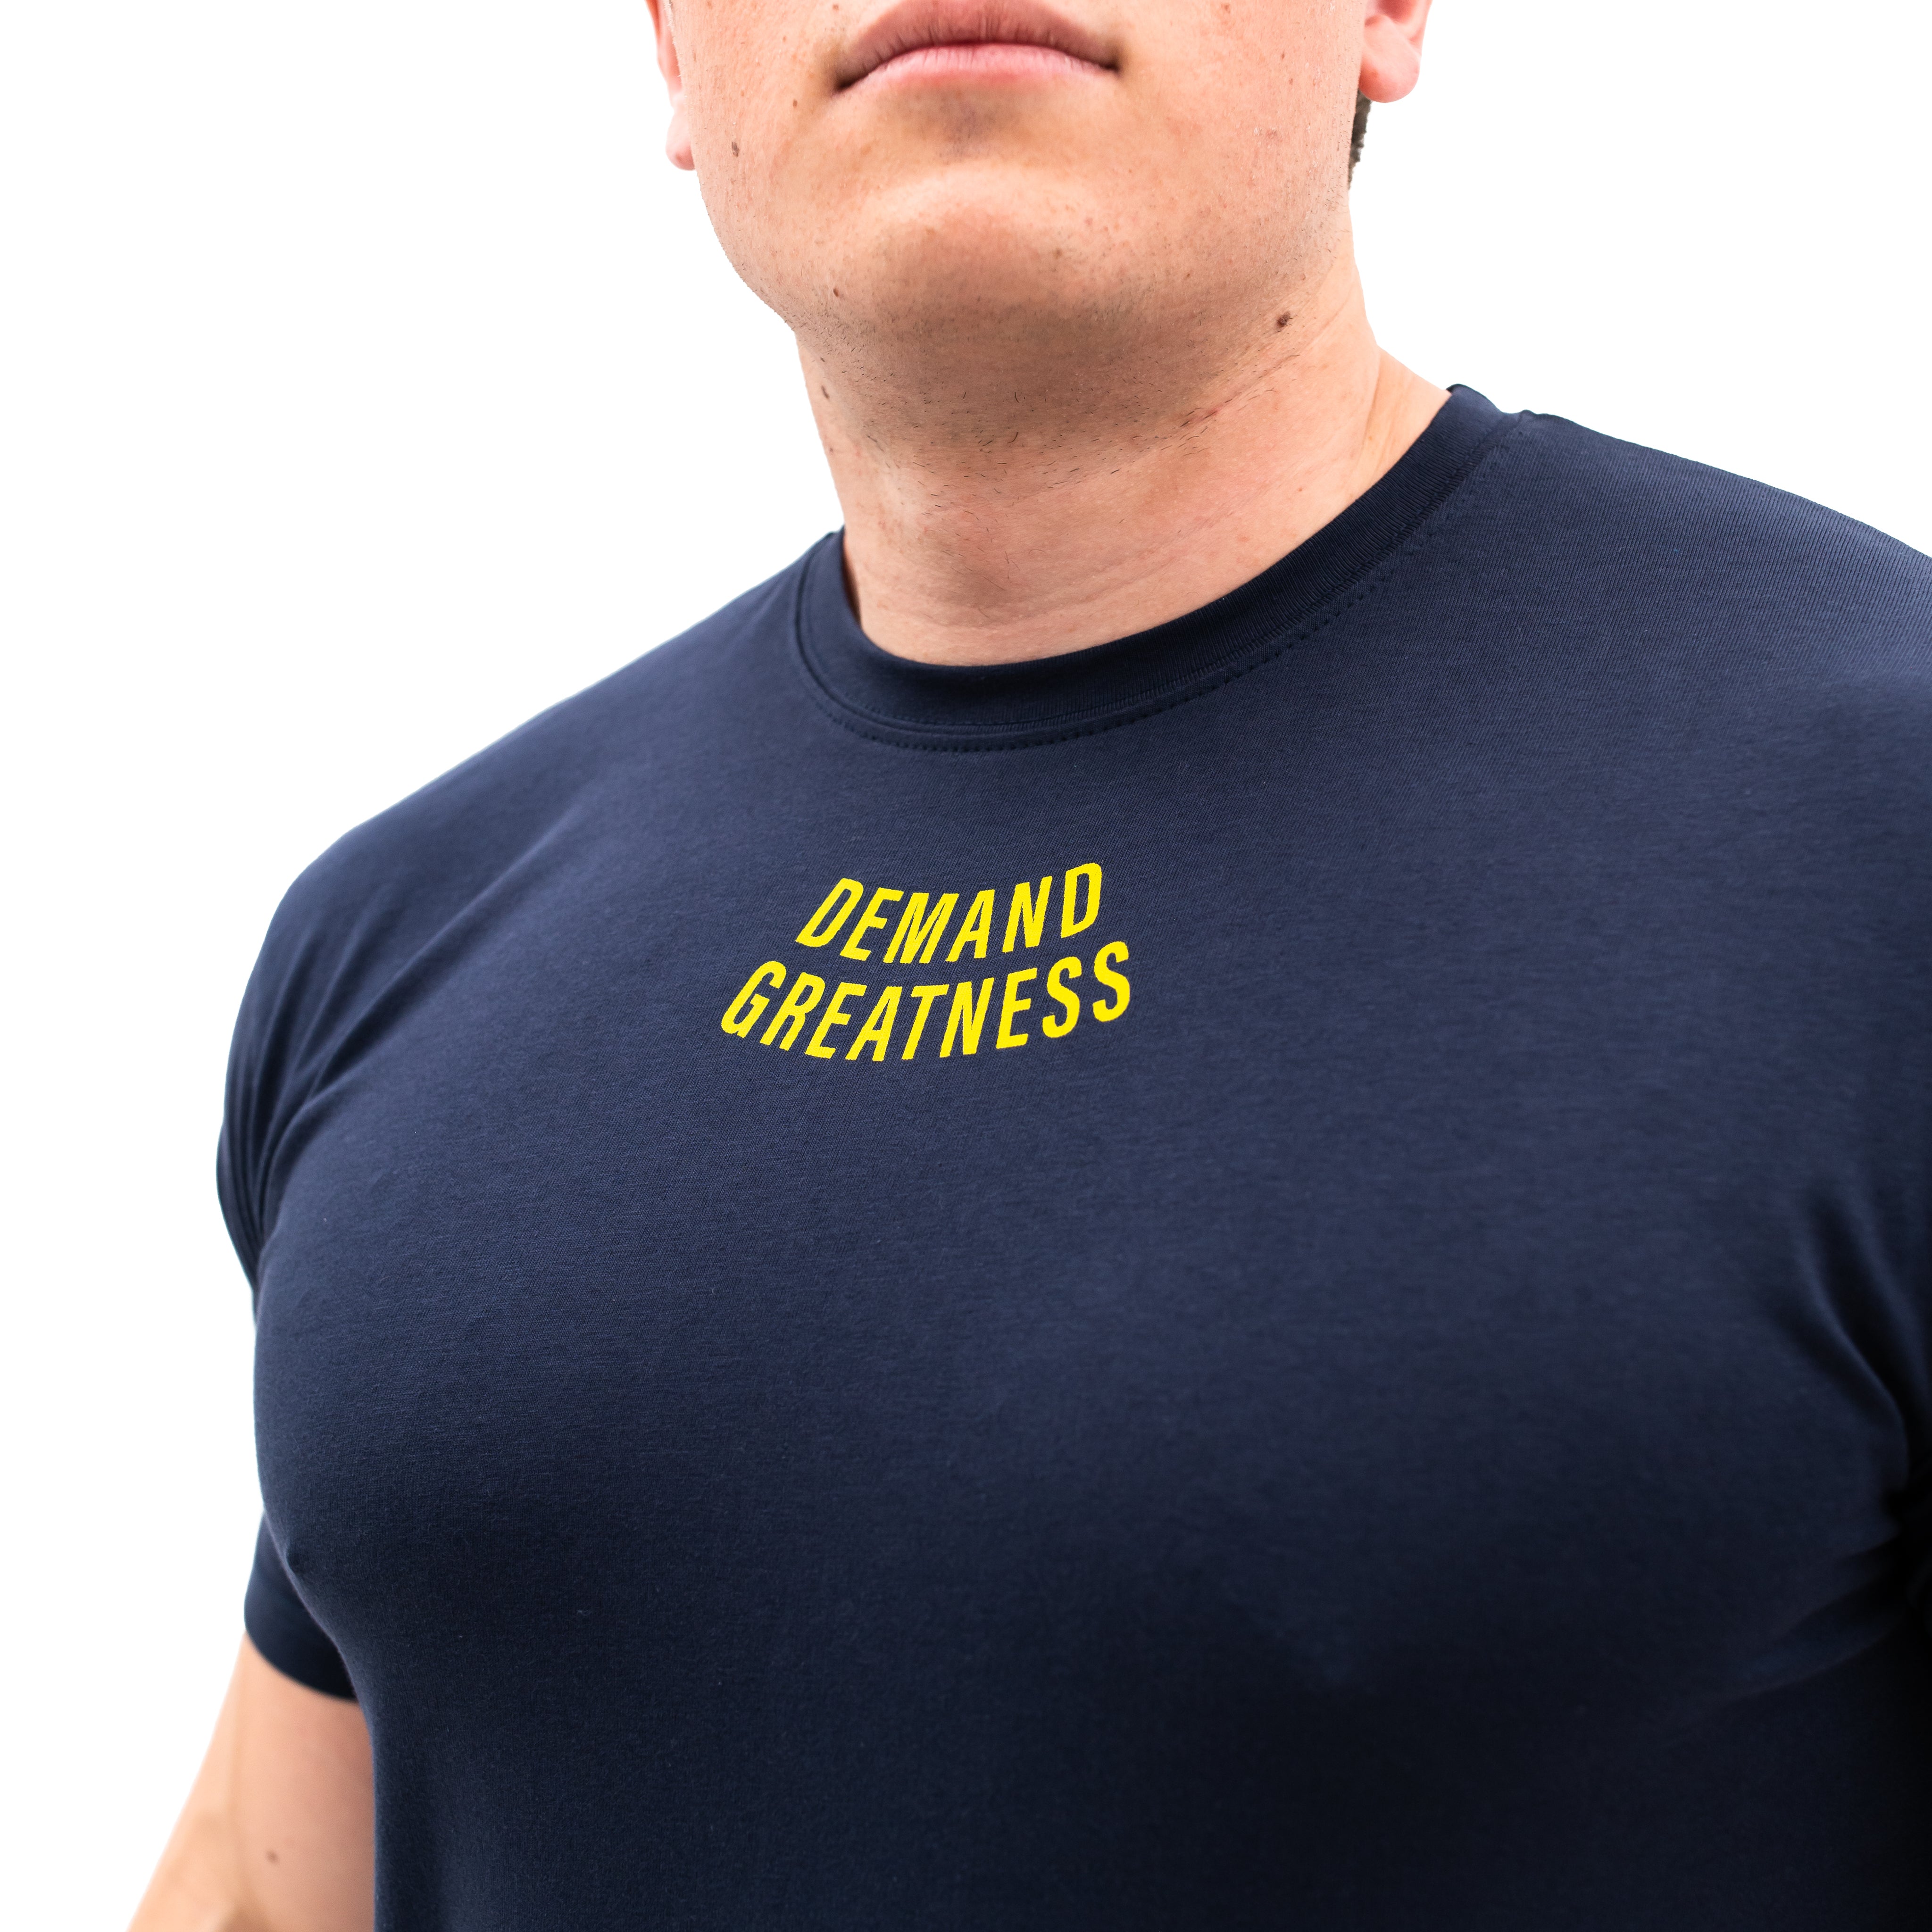 Standout from the crowd in our Electric Lemonade Demand Greatness Meet Shirt and let your energy show on the platform, in your training or while out and about. Our Meet tees offer a level of comfort like no other through their unique blend of materials and stretch in the places you desire for a comfortable fit that keeps your mind on your performance. A great addition to your IPF Approved Kit.